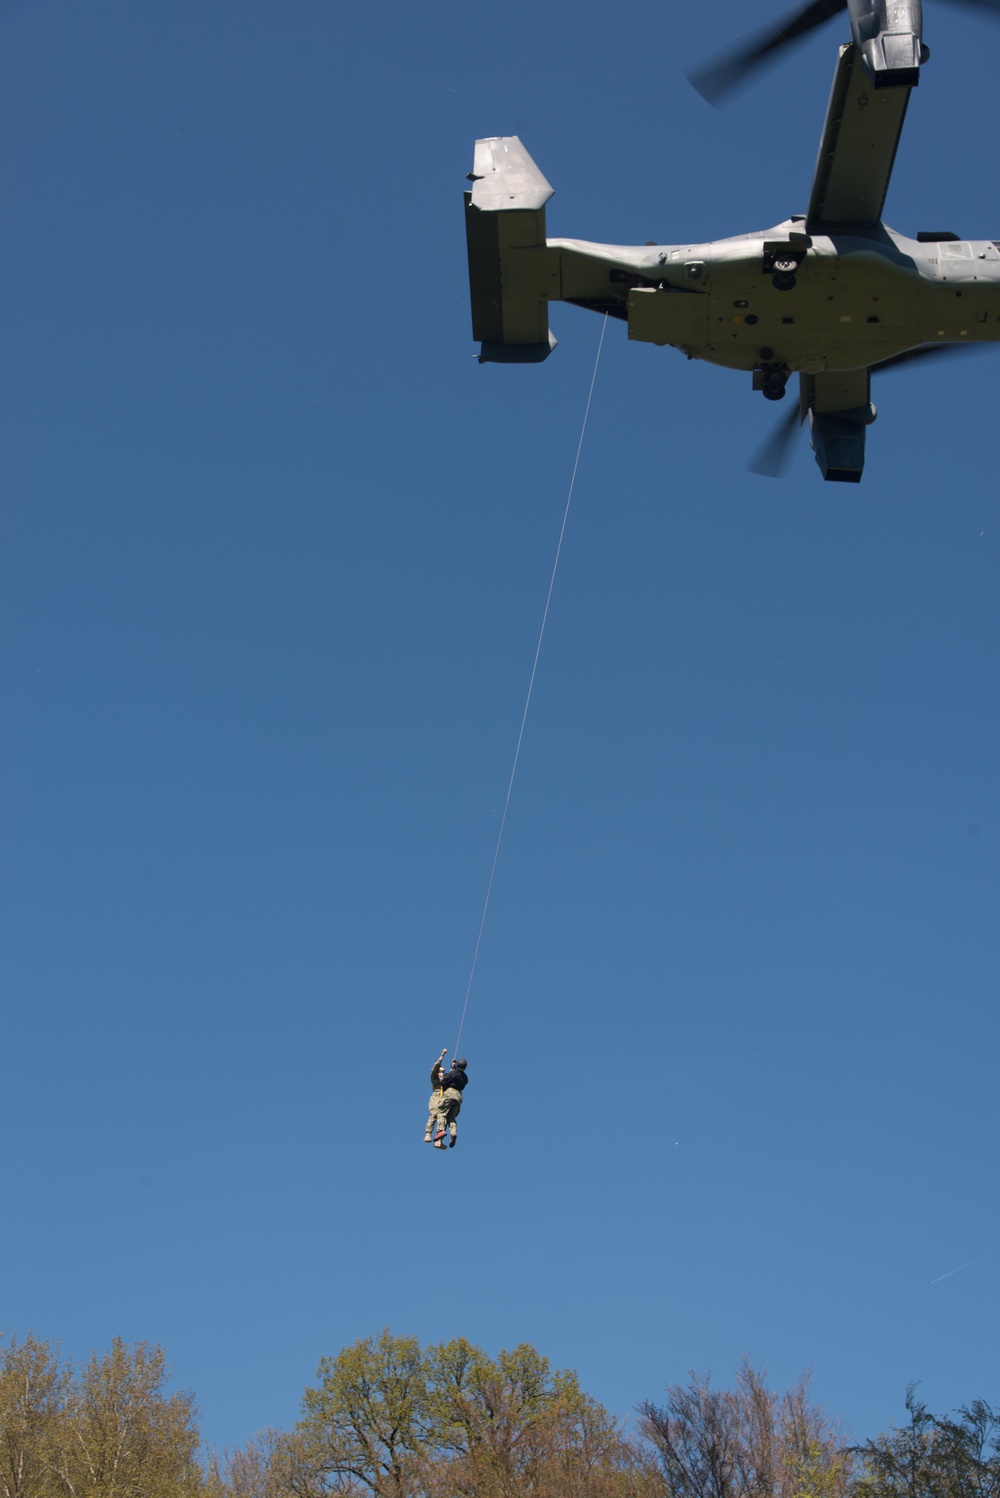 SOCEUR U.S. Sailors and Airman train insertion and extraction techniques utilizing an MV-22 Osprey